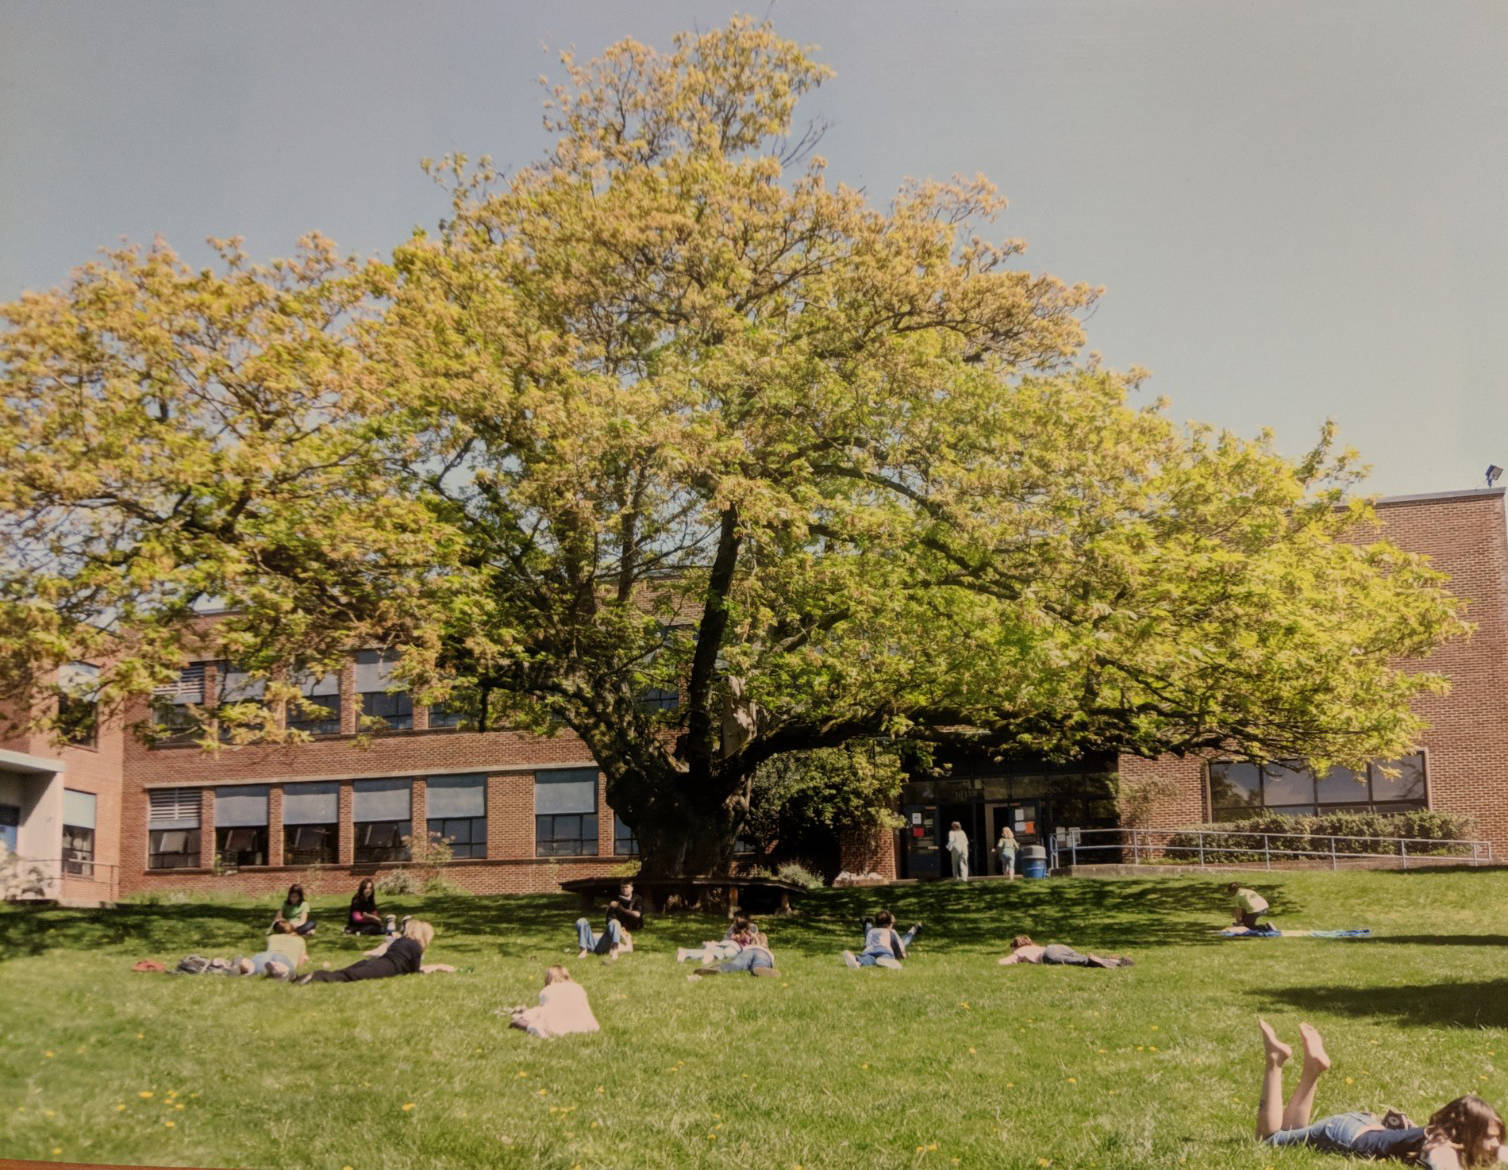 The fourth-grade class in 2007 reading under the tree.